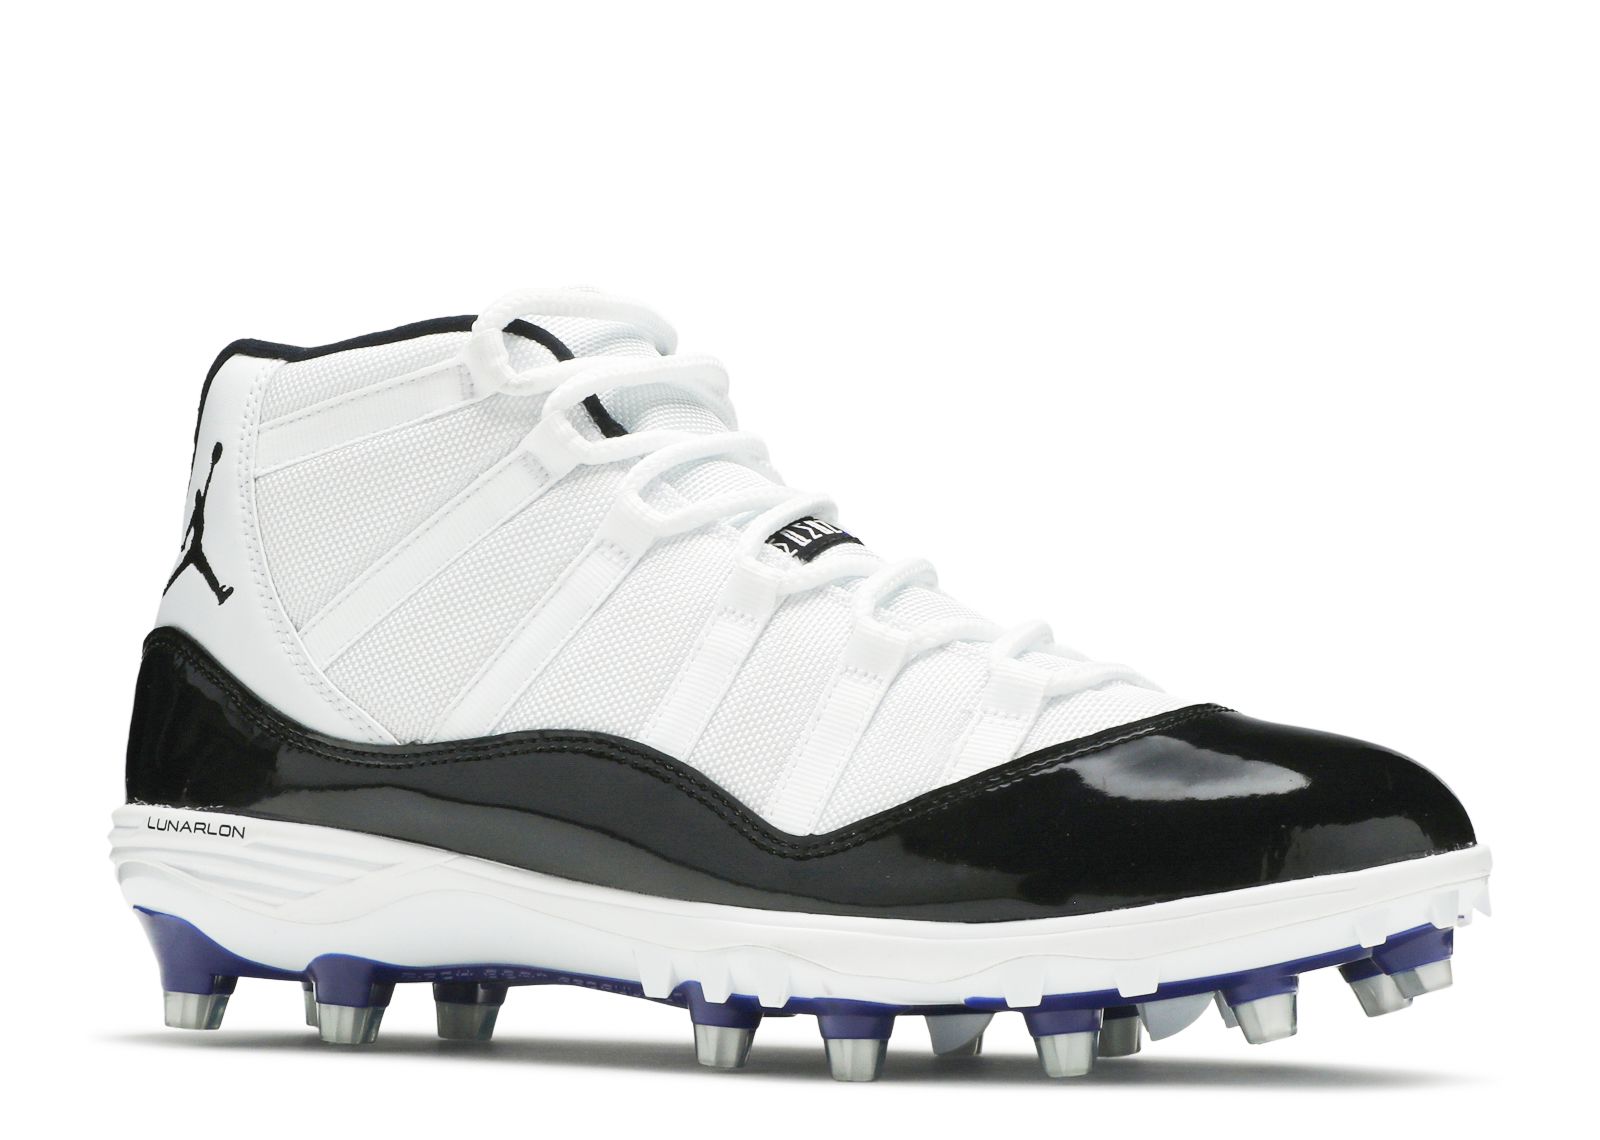 concord 11 football cleats